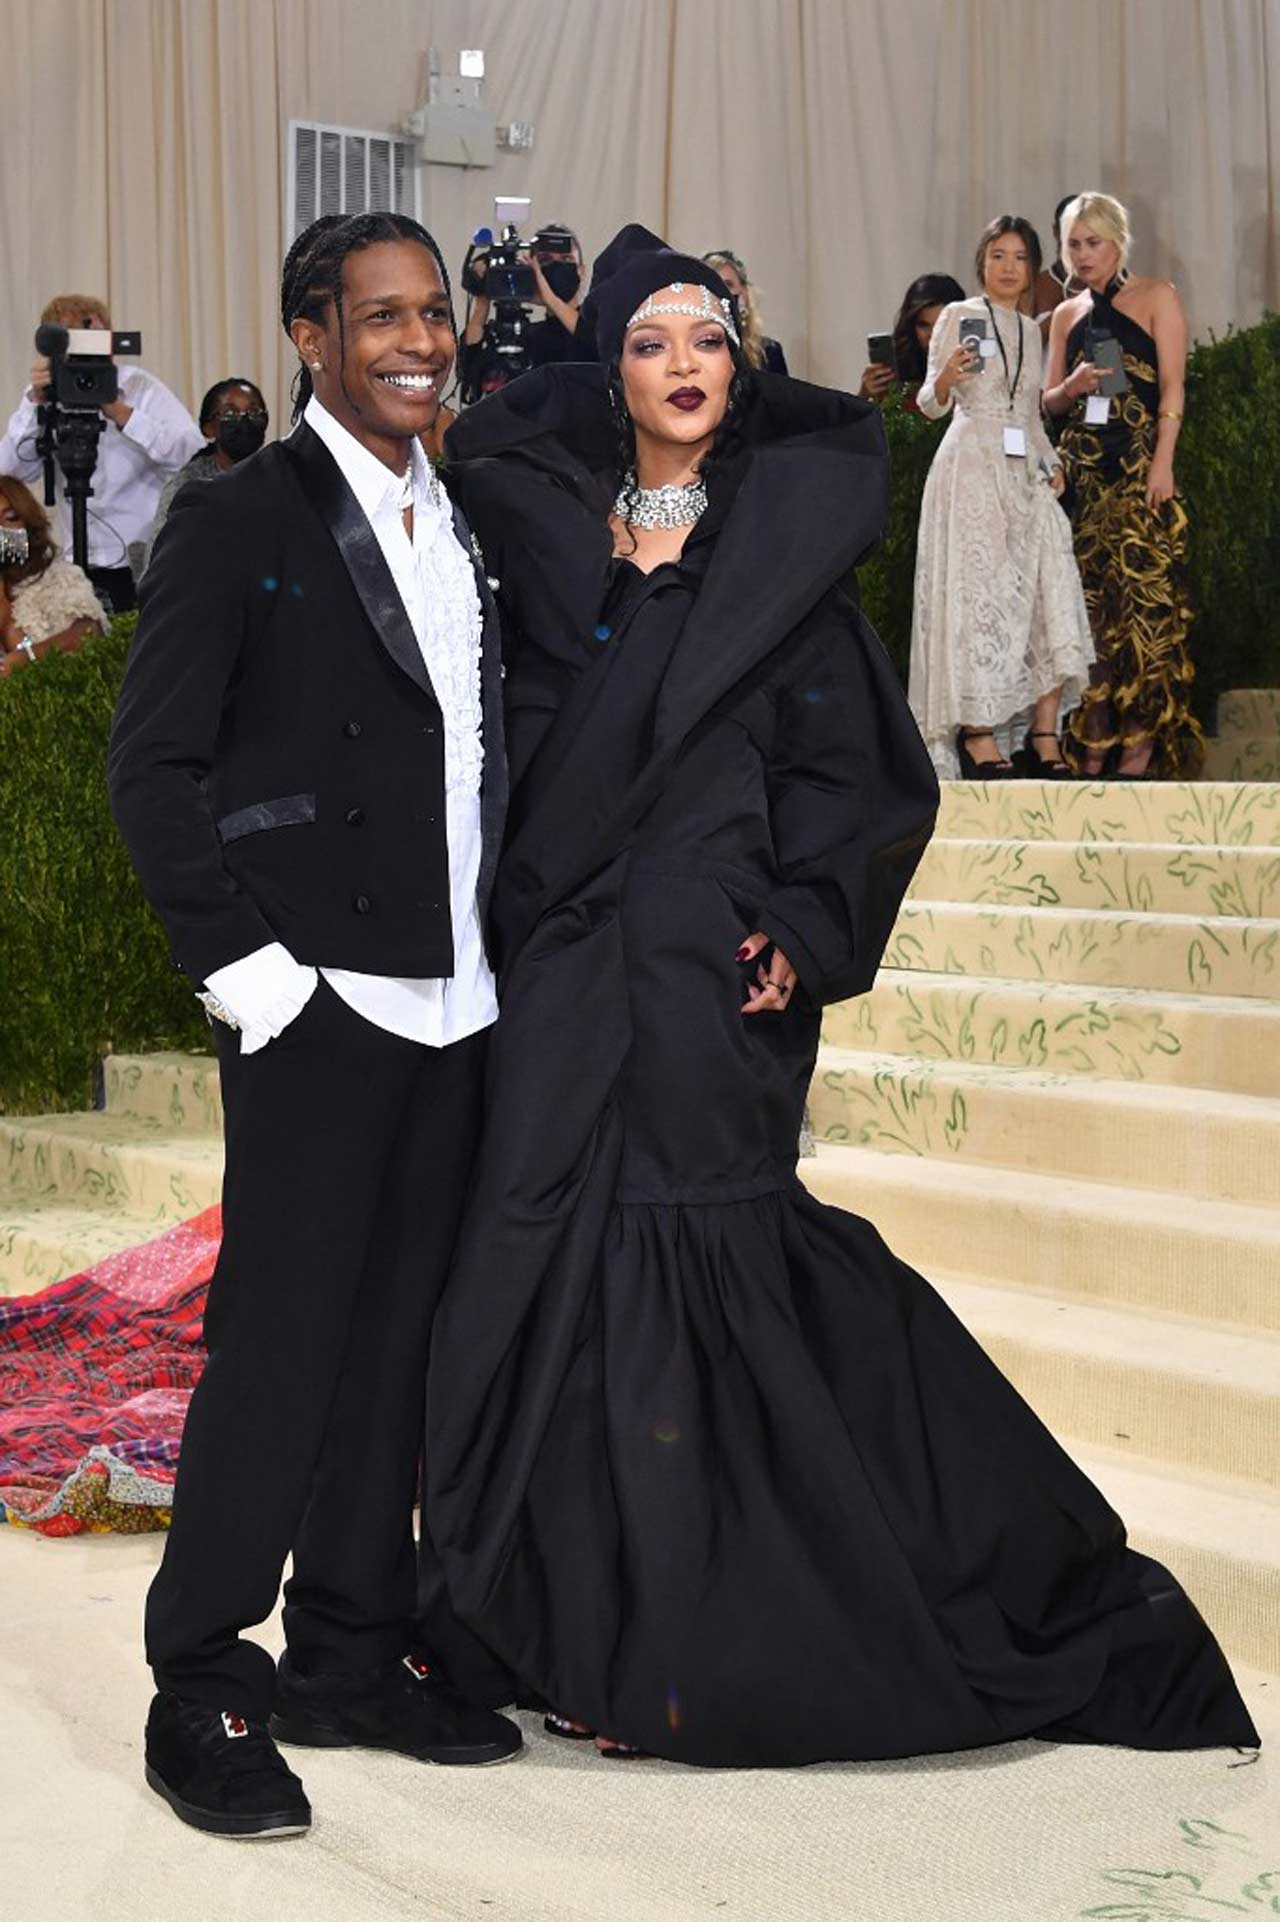 Rihanna and A$AP Rocky stole the show as they arrived together, marking their red carpet debut at the Met Gala 2021. Rihanna was dressed in a gigantic sculptural coat dress, featuring a high collar and flared hem, while A$AP Rocky wrapped himself in a multicolour quilted blanket look.